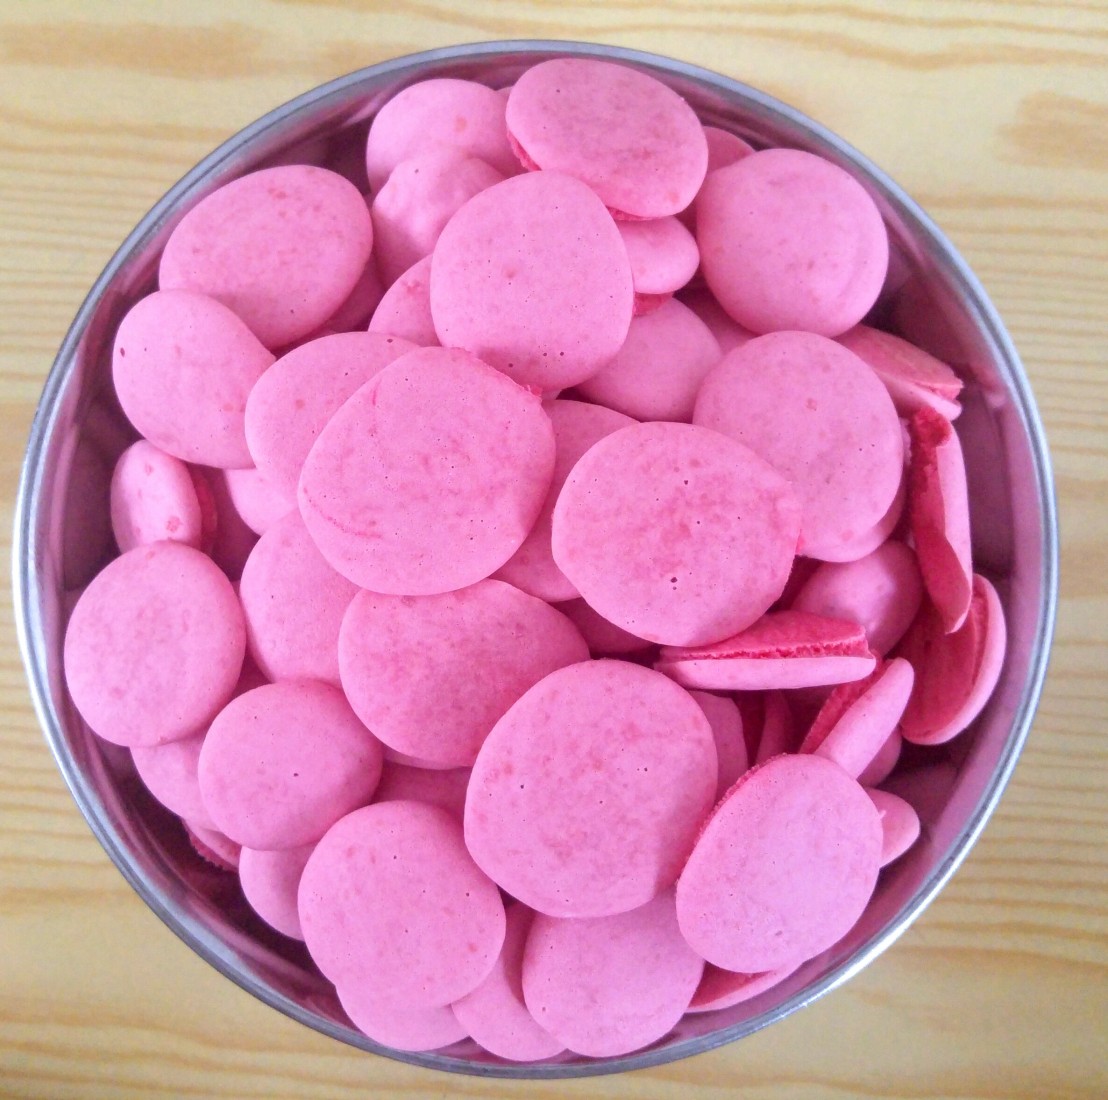 Small, round pink cookies in a metal bowl